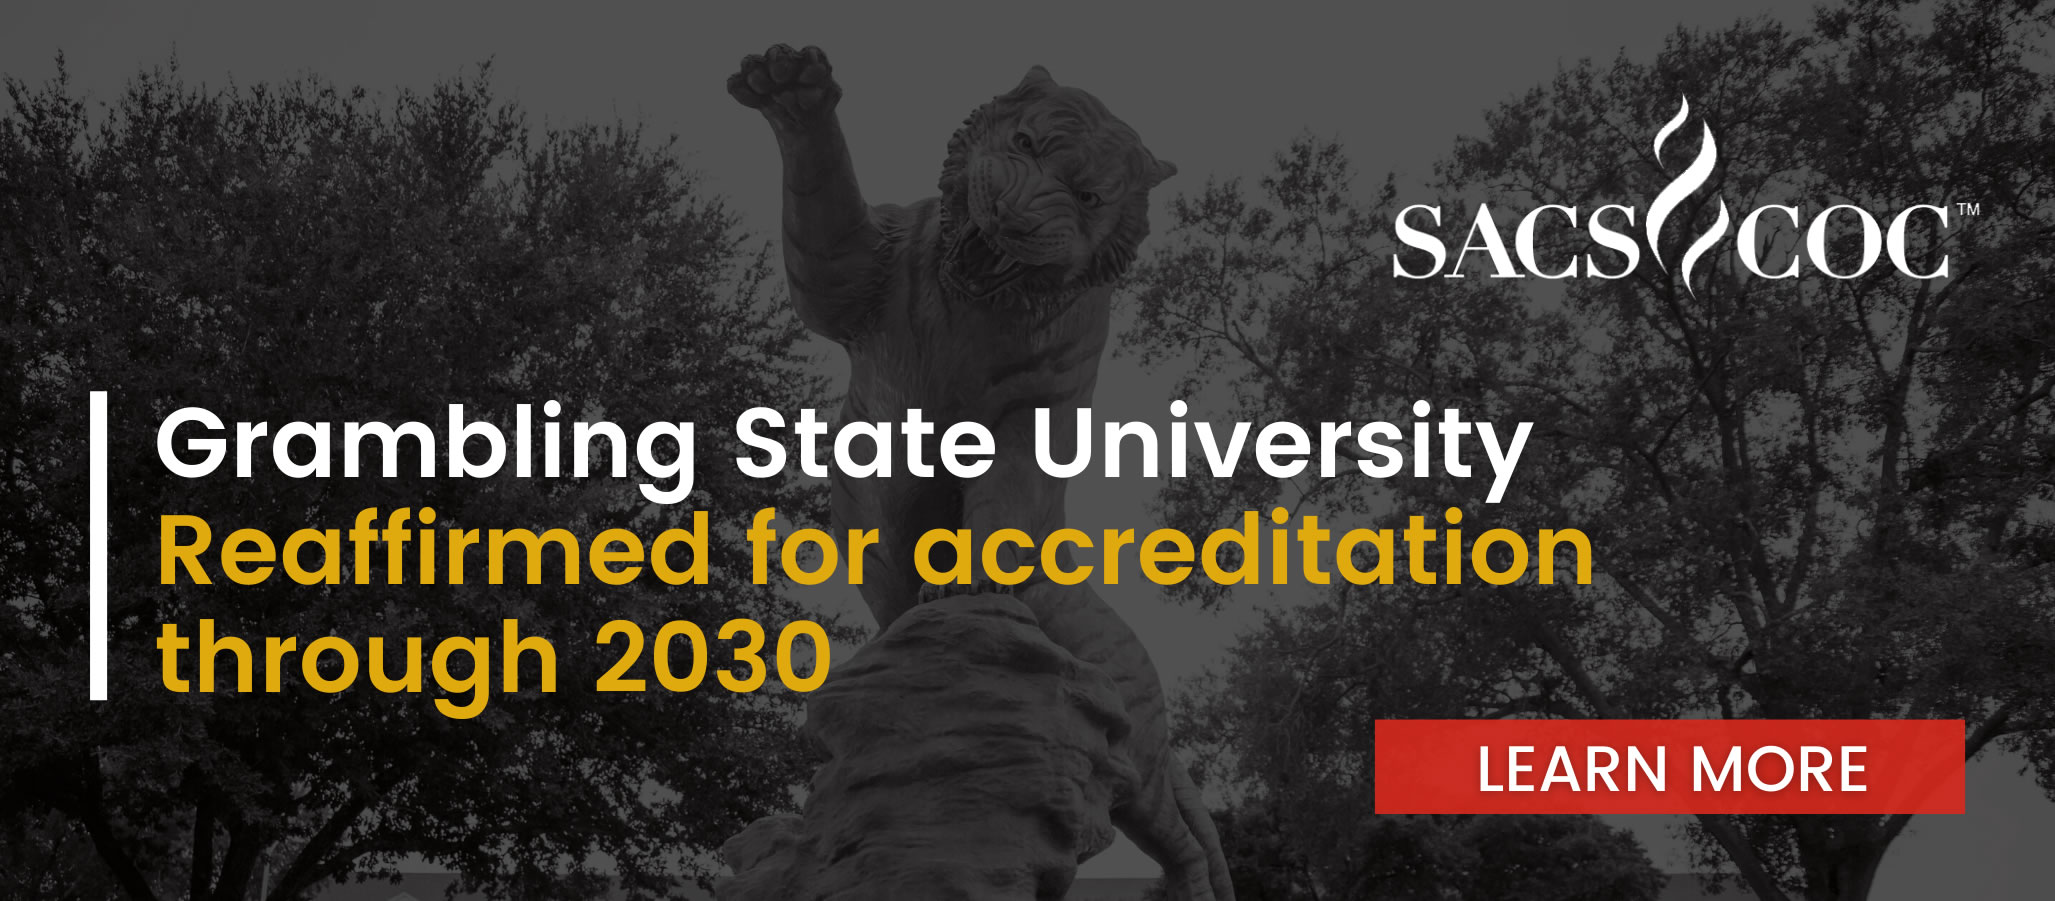 Grambling State University Reaffirmed for Accreditation through 2030. Learn More...